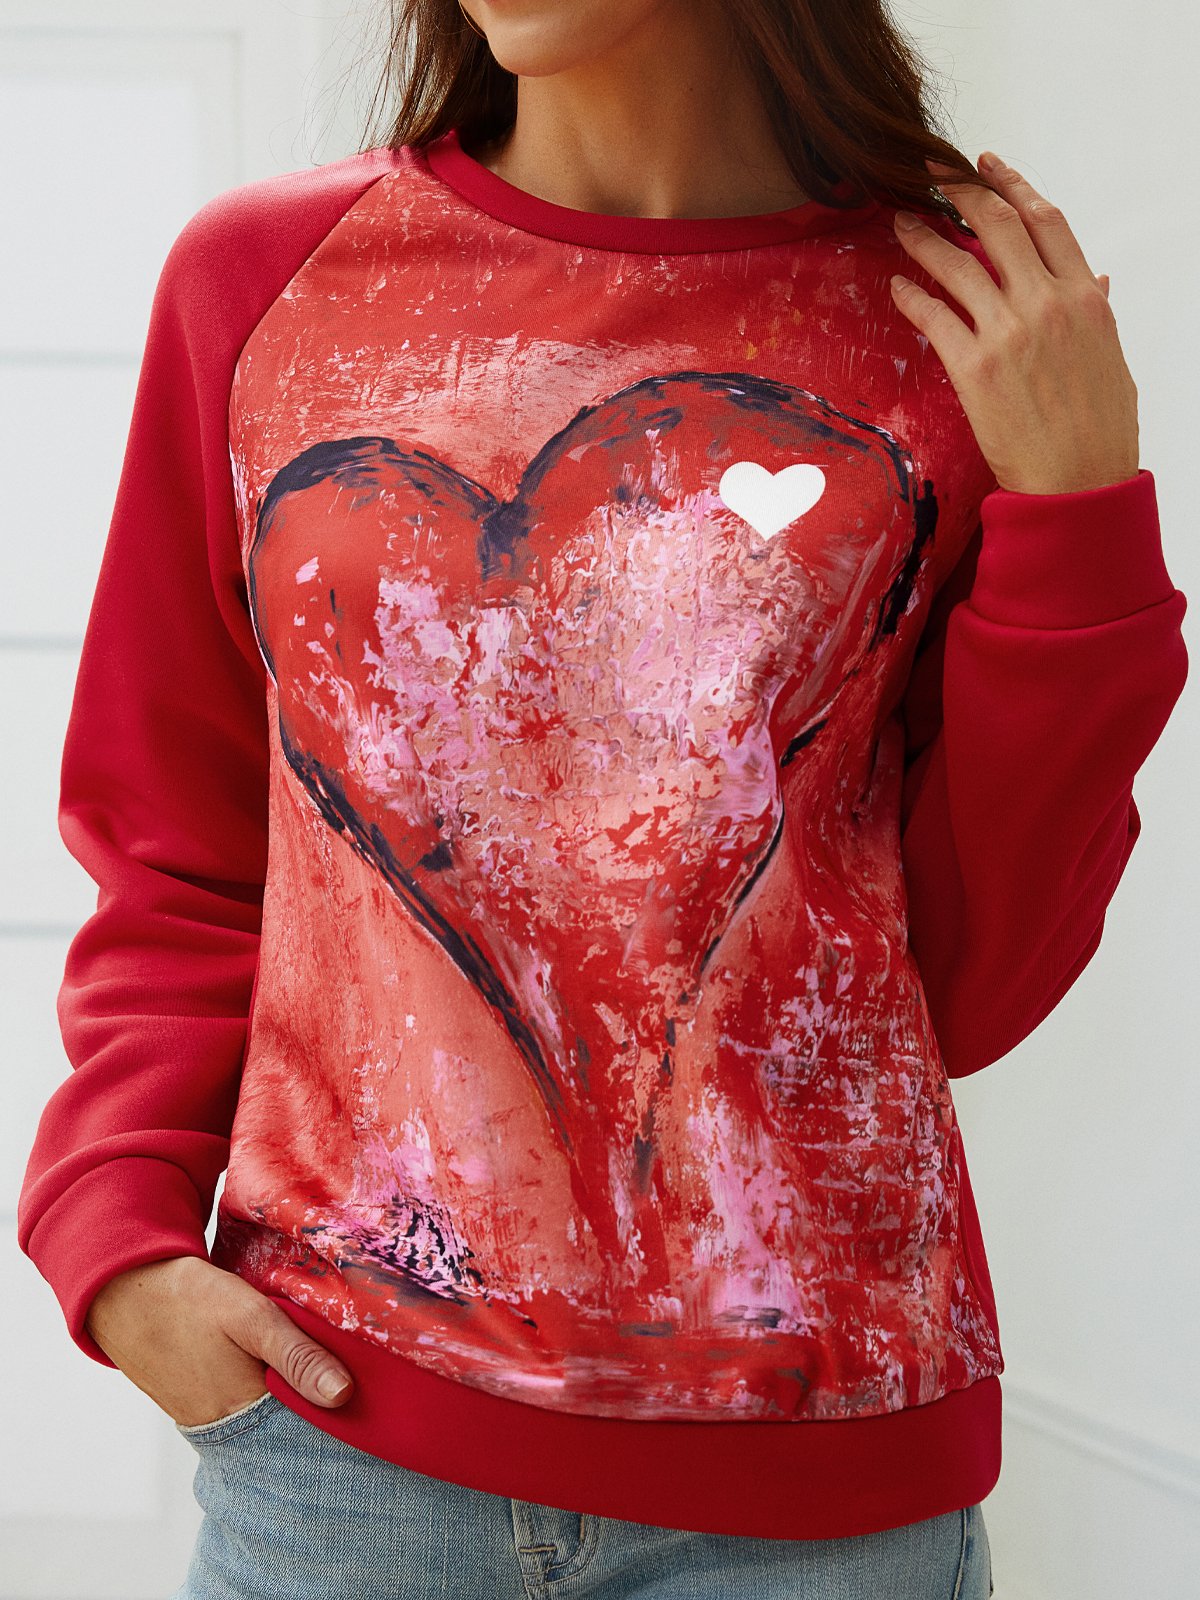 Women's Pullovers Casual Heart-shaped Color Block Long Sleeve Round Neck Pullovers